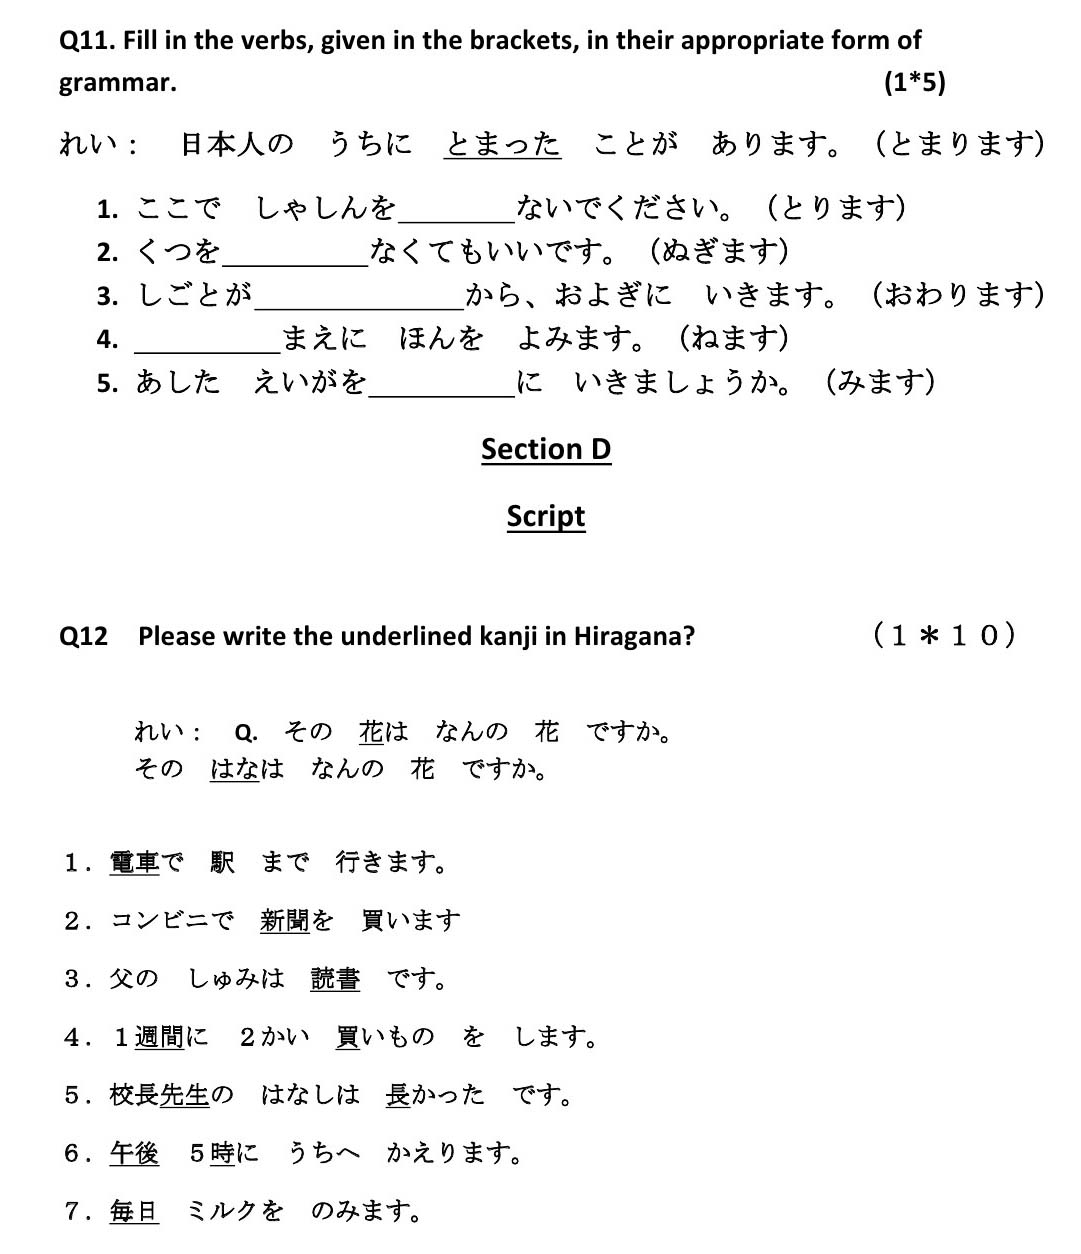 Japanese CBSE Class X Sample Question Paper 2018-19 - Image 7